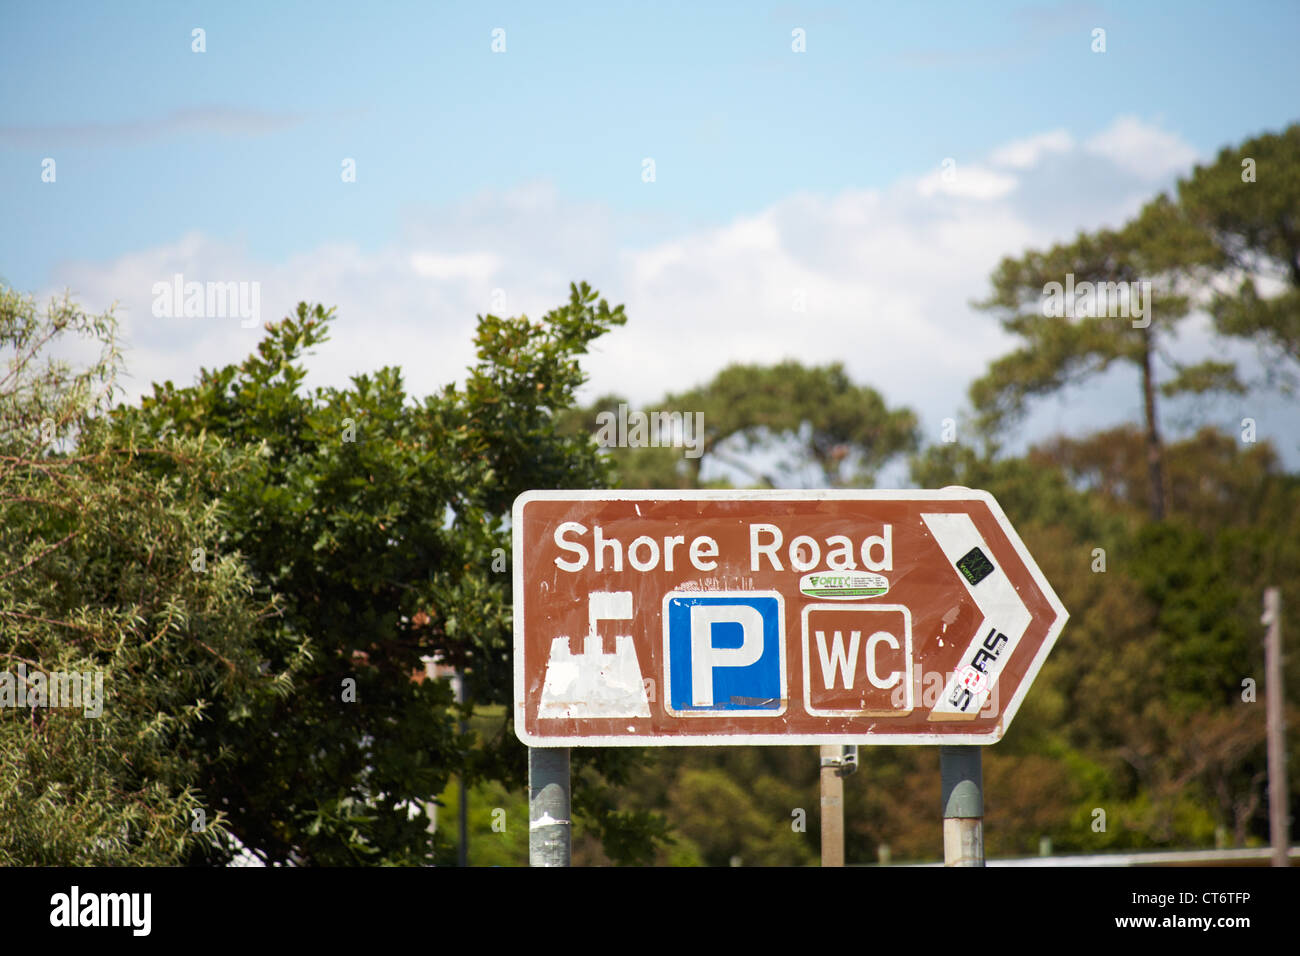 Beach car park sign pointing to Shore Road for Sandbanks, Poole, Dorset UK  in June Stock Photo